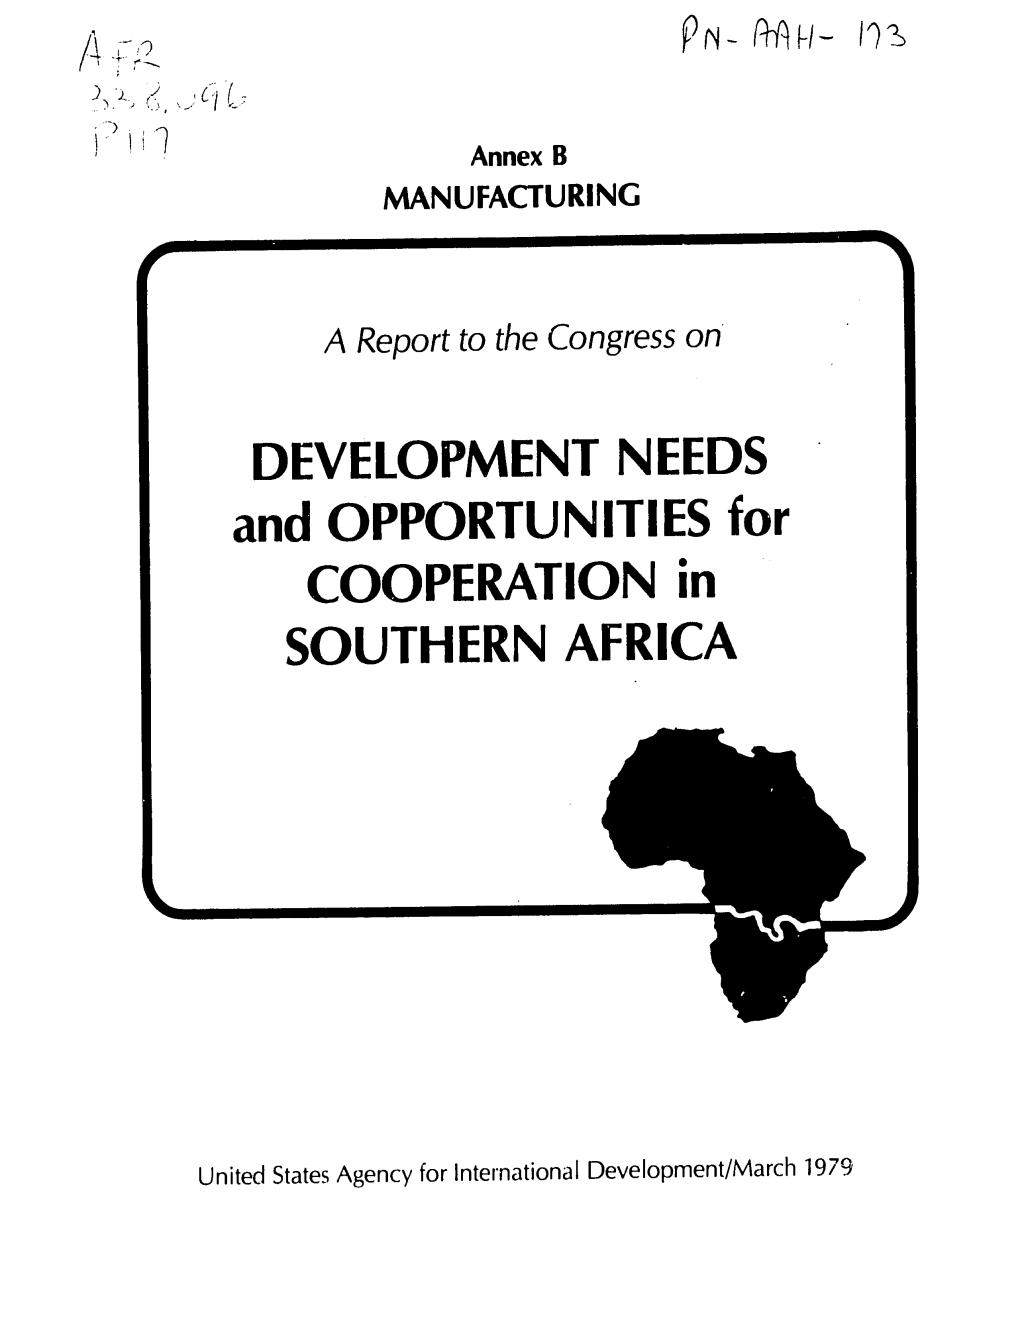 DEVELOPMENT NEEDS and OPPORTUNITIES for COOPERATION in SOUTHERN AFRICA